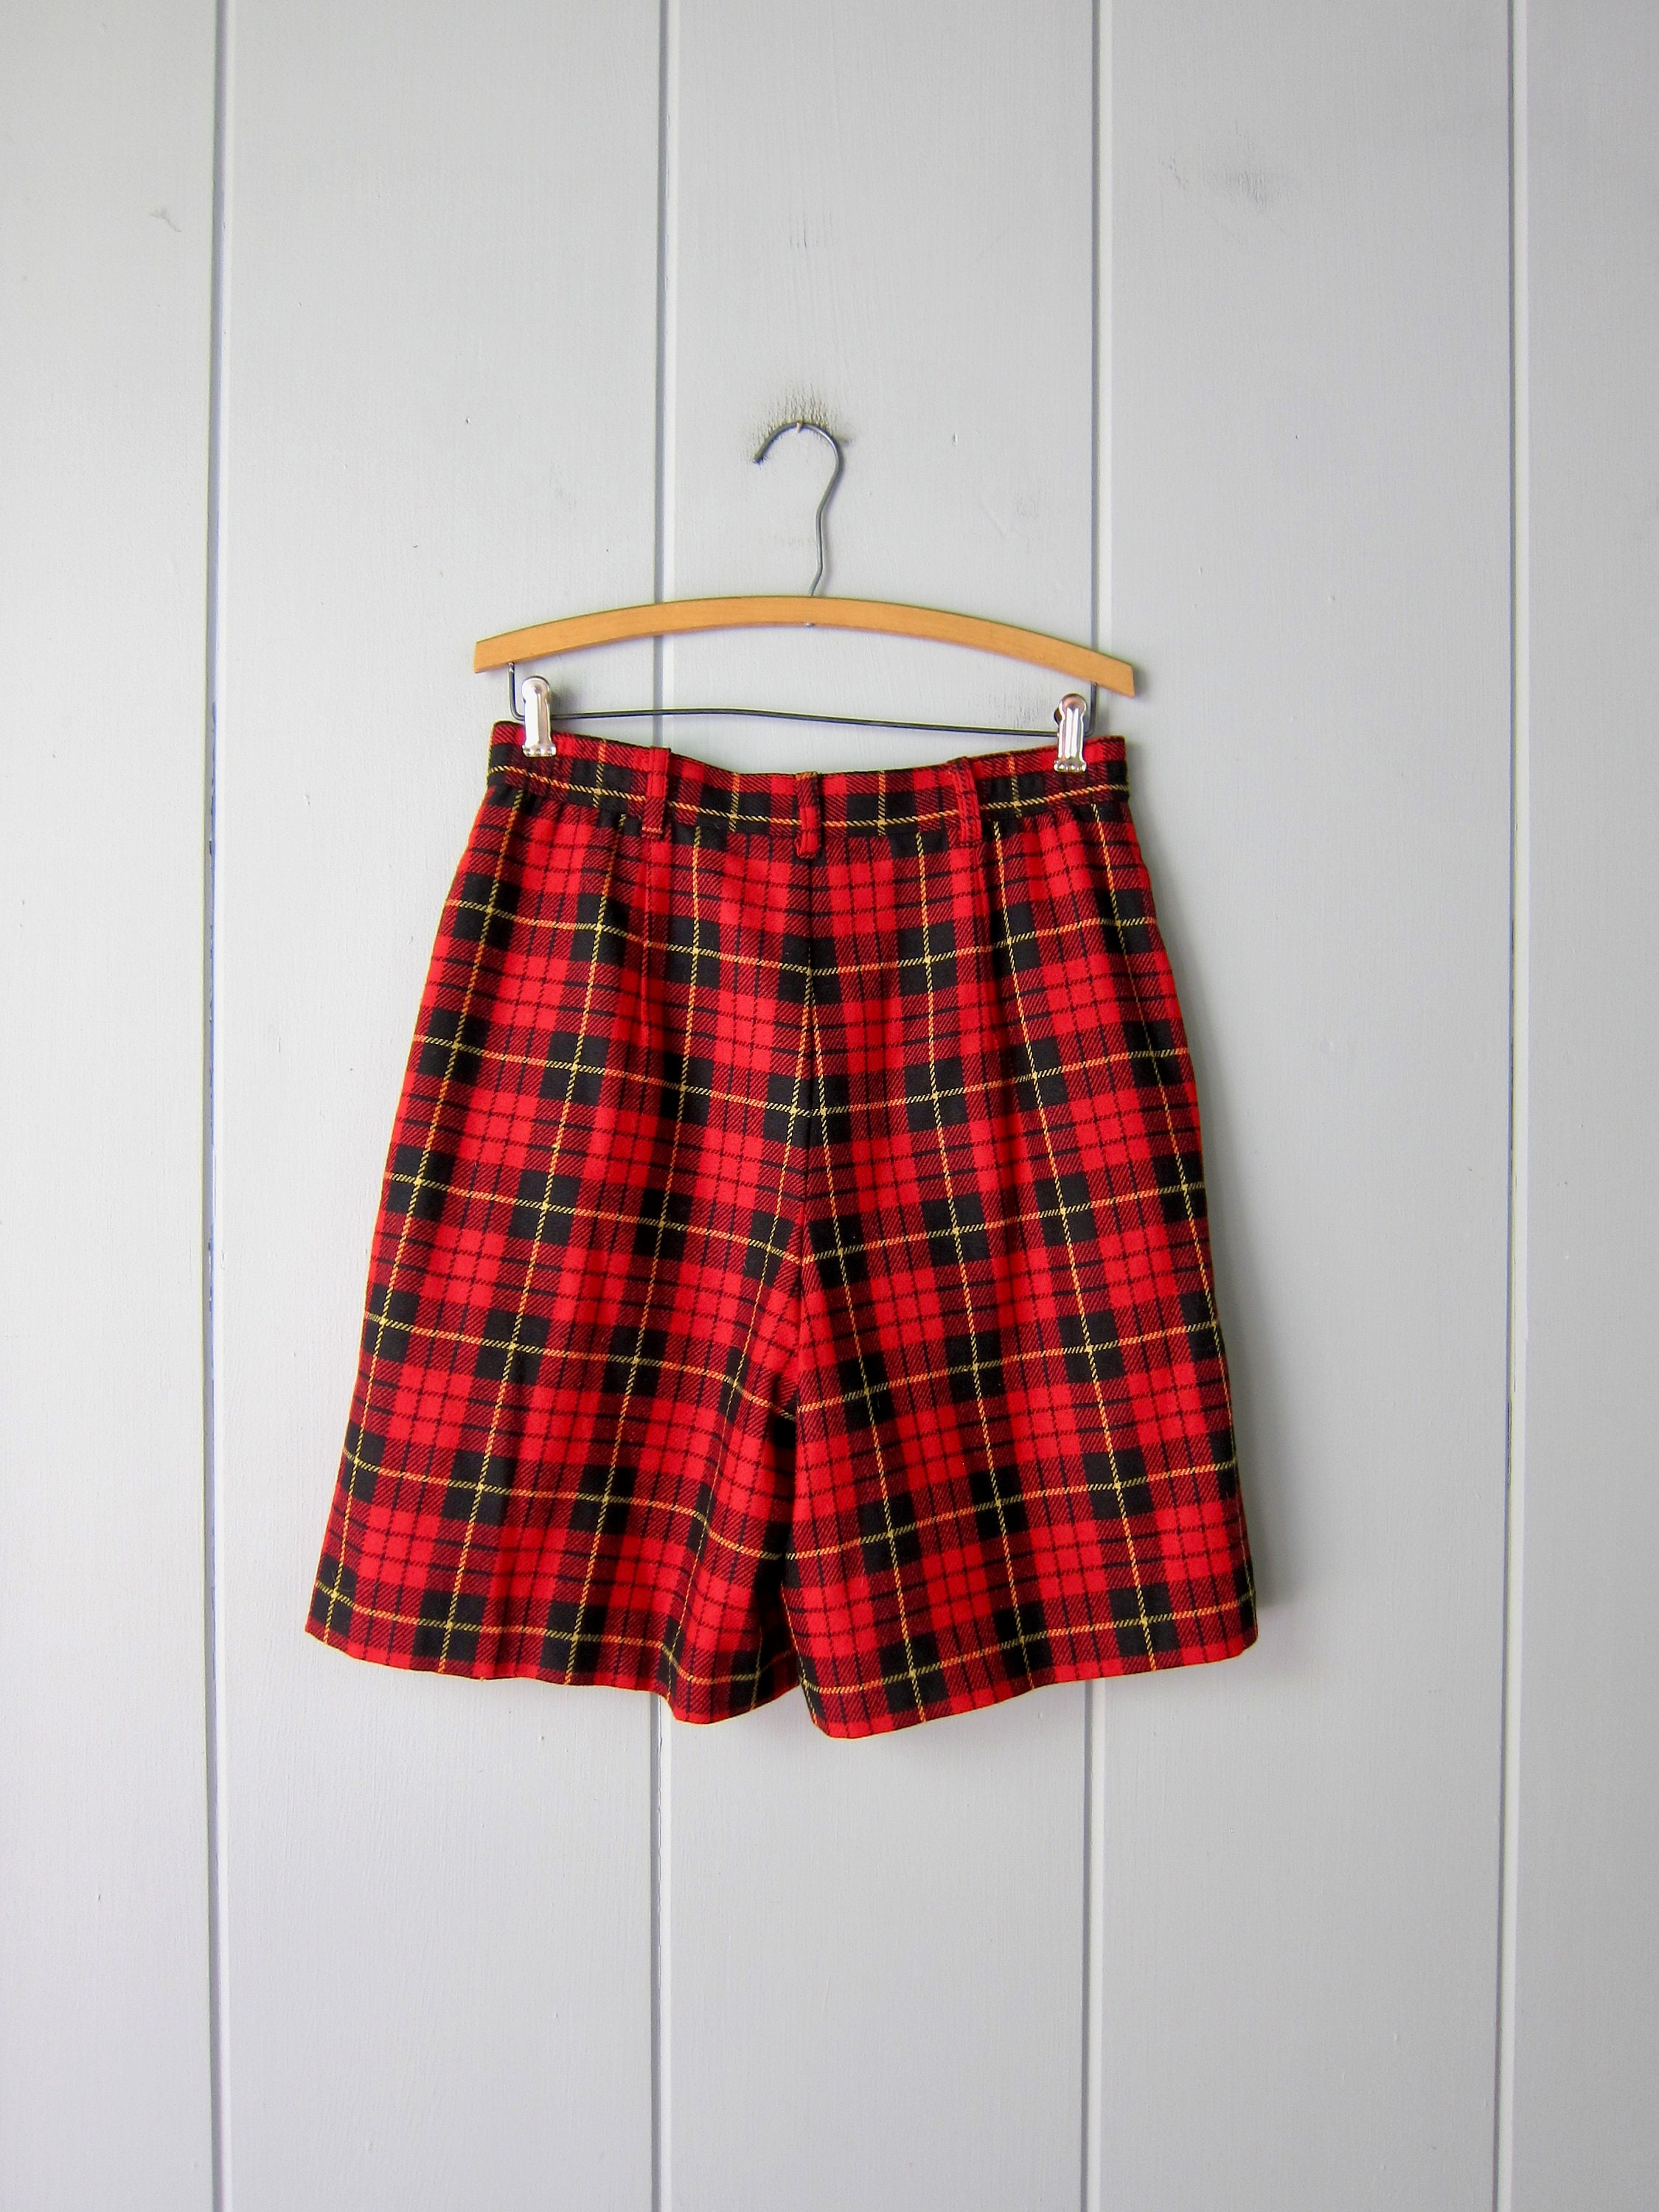 Red Wool Plaid Shorts 80s High Waist Pleated Shorts | Etsy